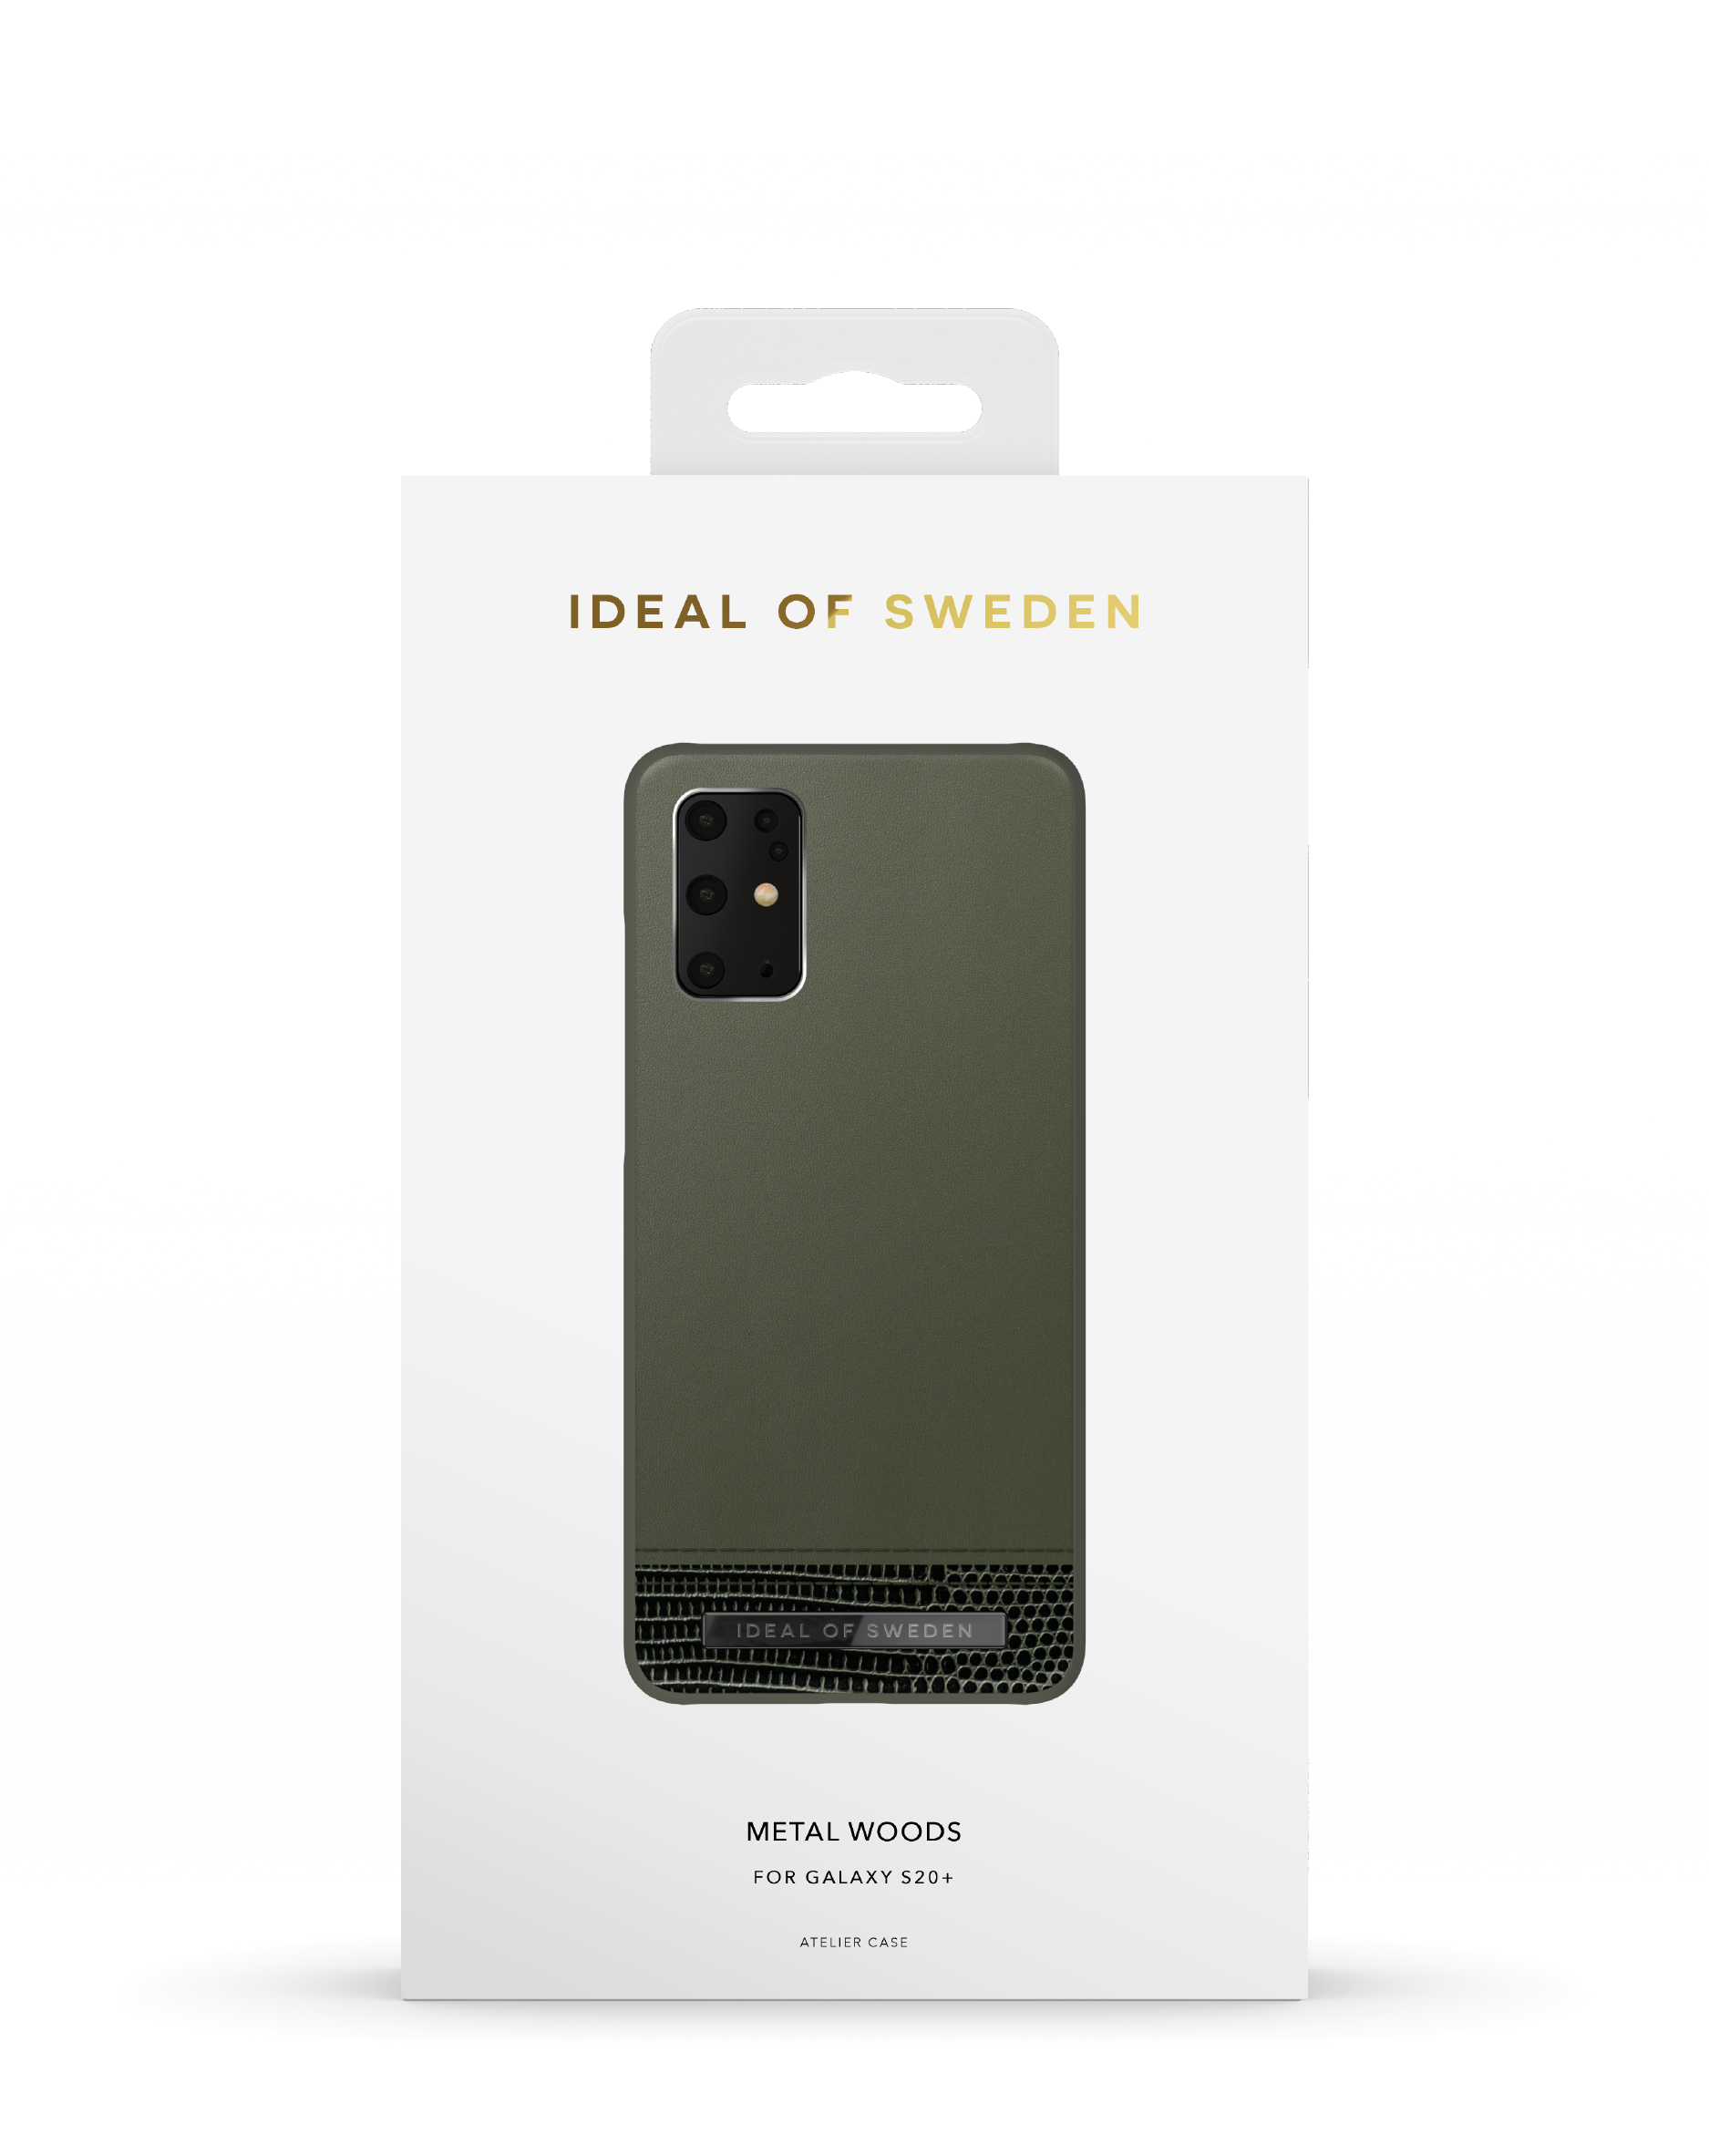 Metal IDACAW20-S11P-235, S20 Woods Ultra, SWEDEN Backcover, Galaxy Samsung, IDEAL OF